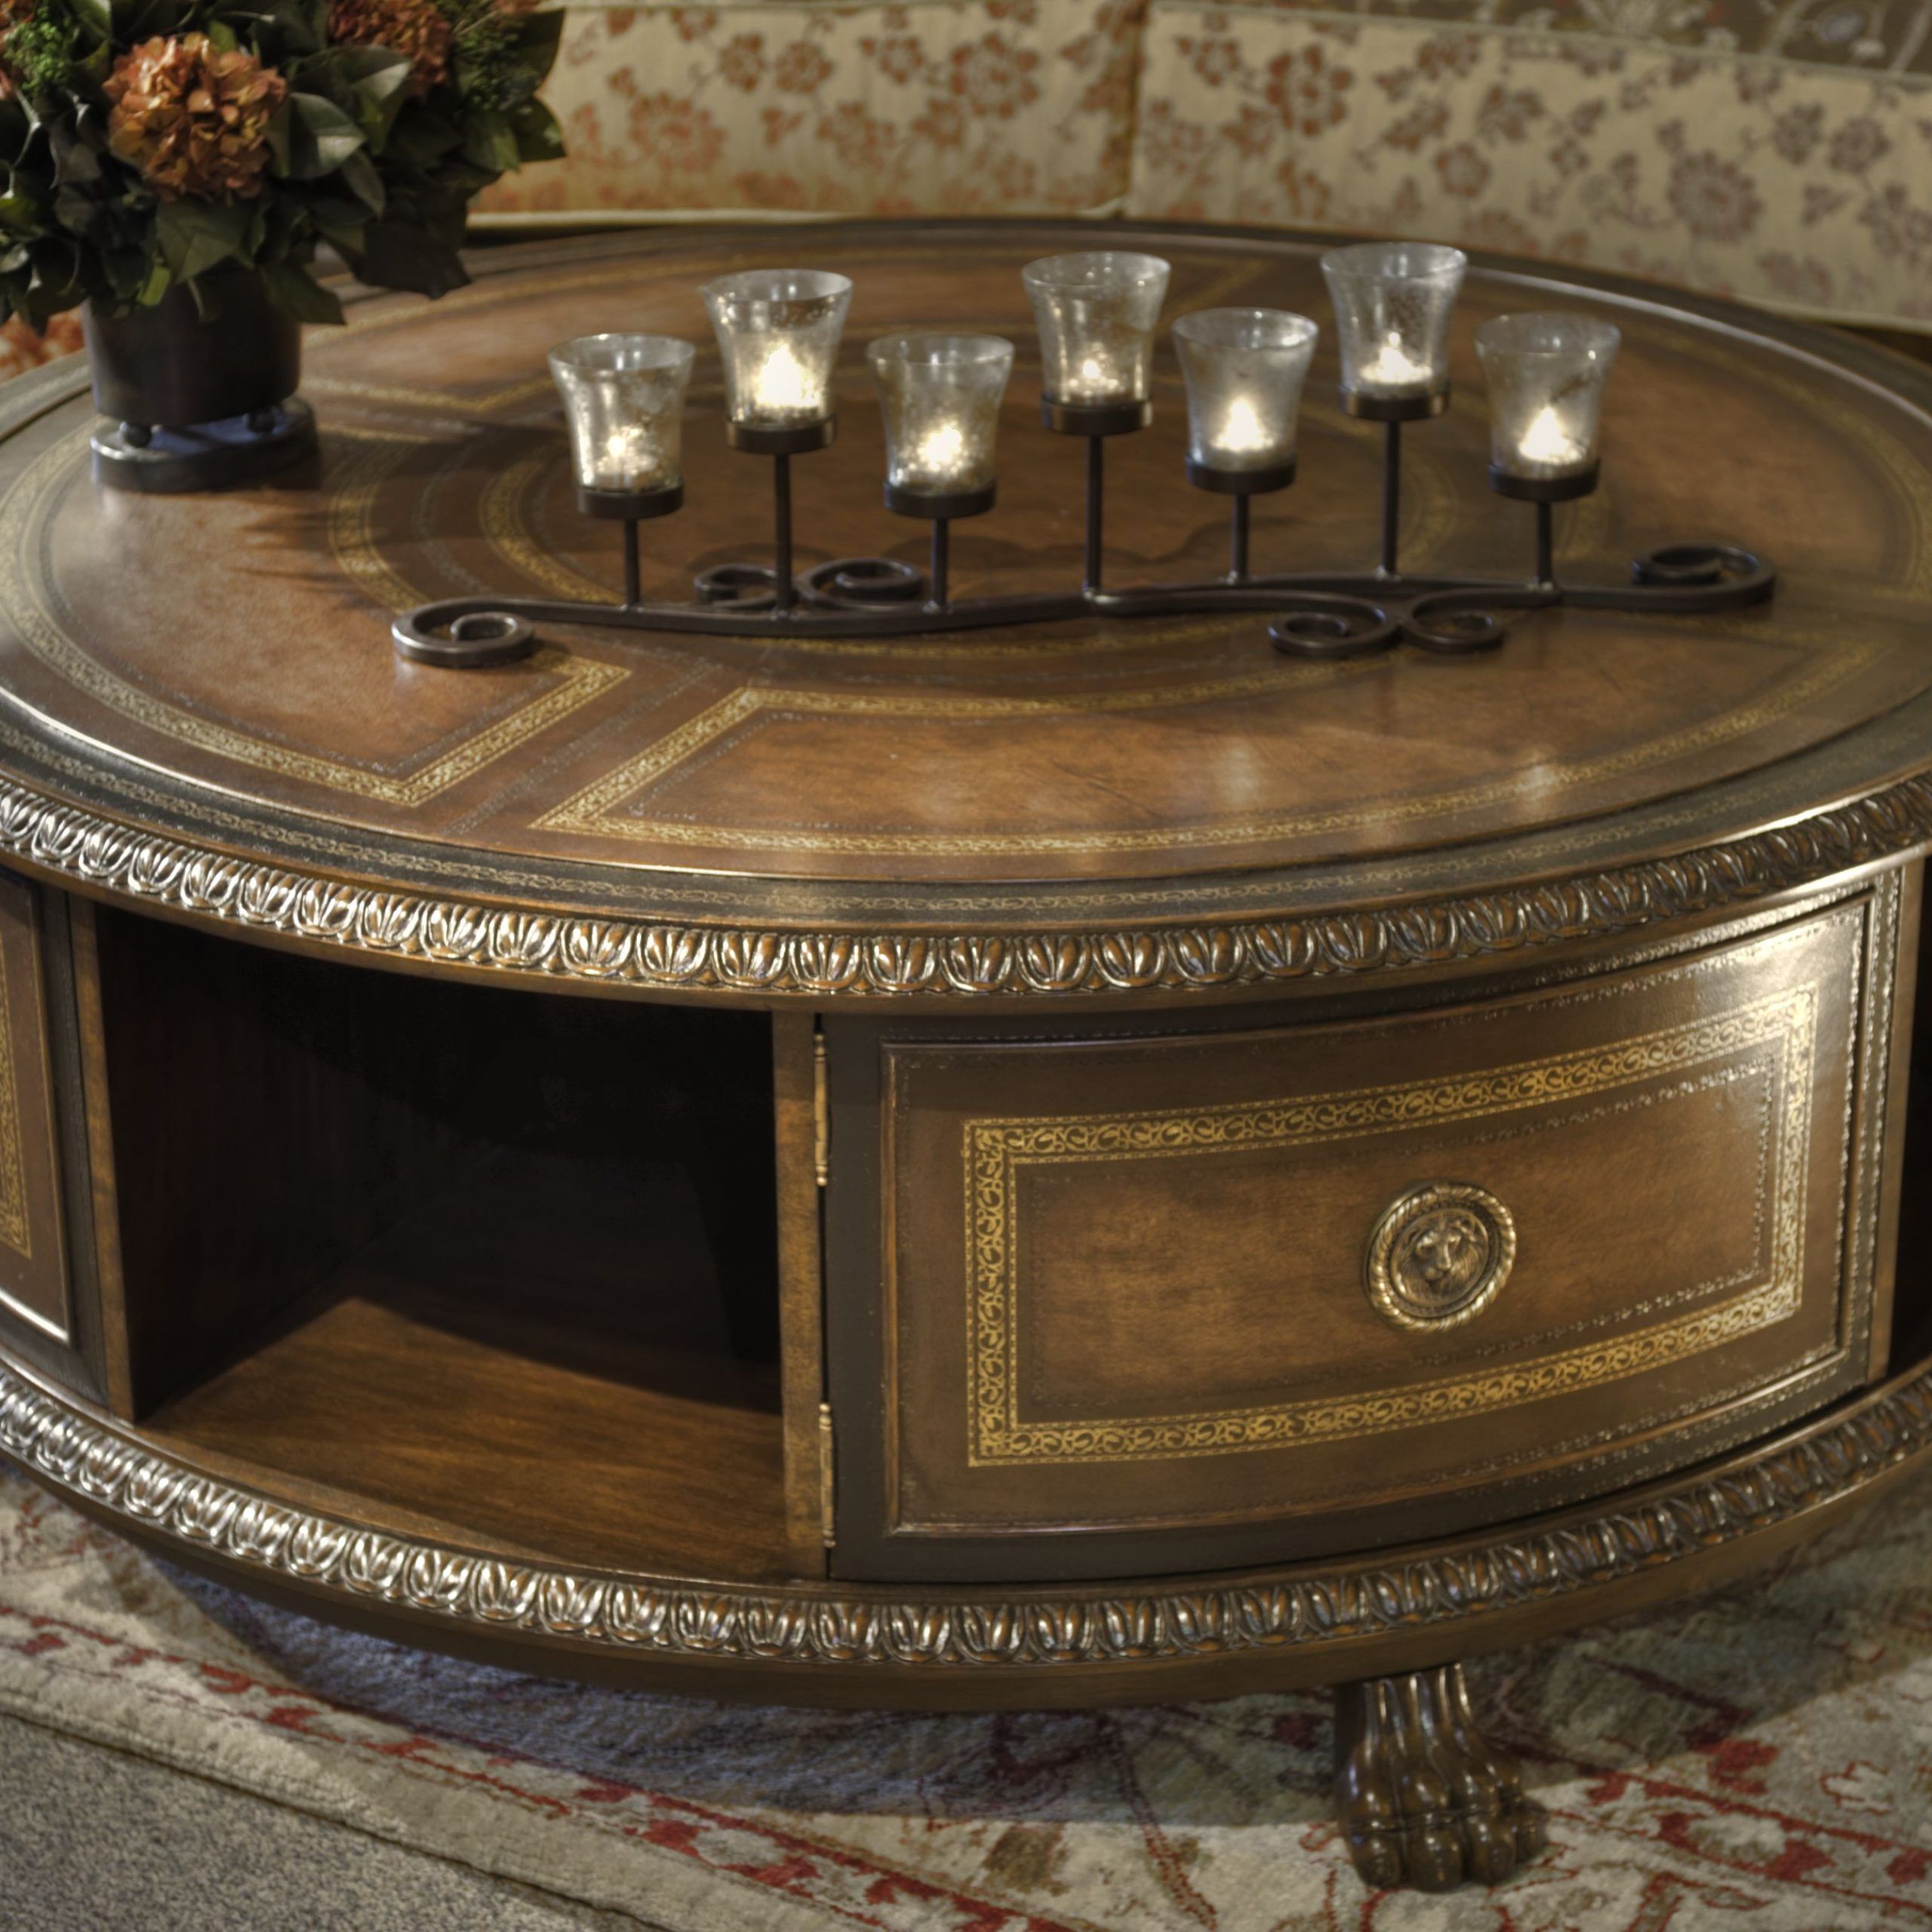 Swivel Round Coffee Table: This Unique Styled Coffee Table Has A Gentle Within Round Coffee Tables With Storage (View 18 of 20)